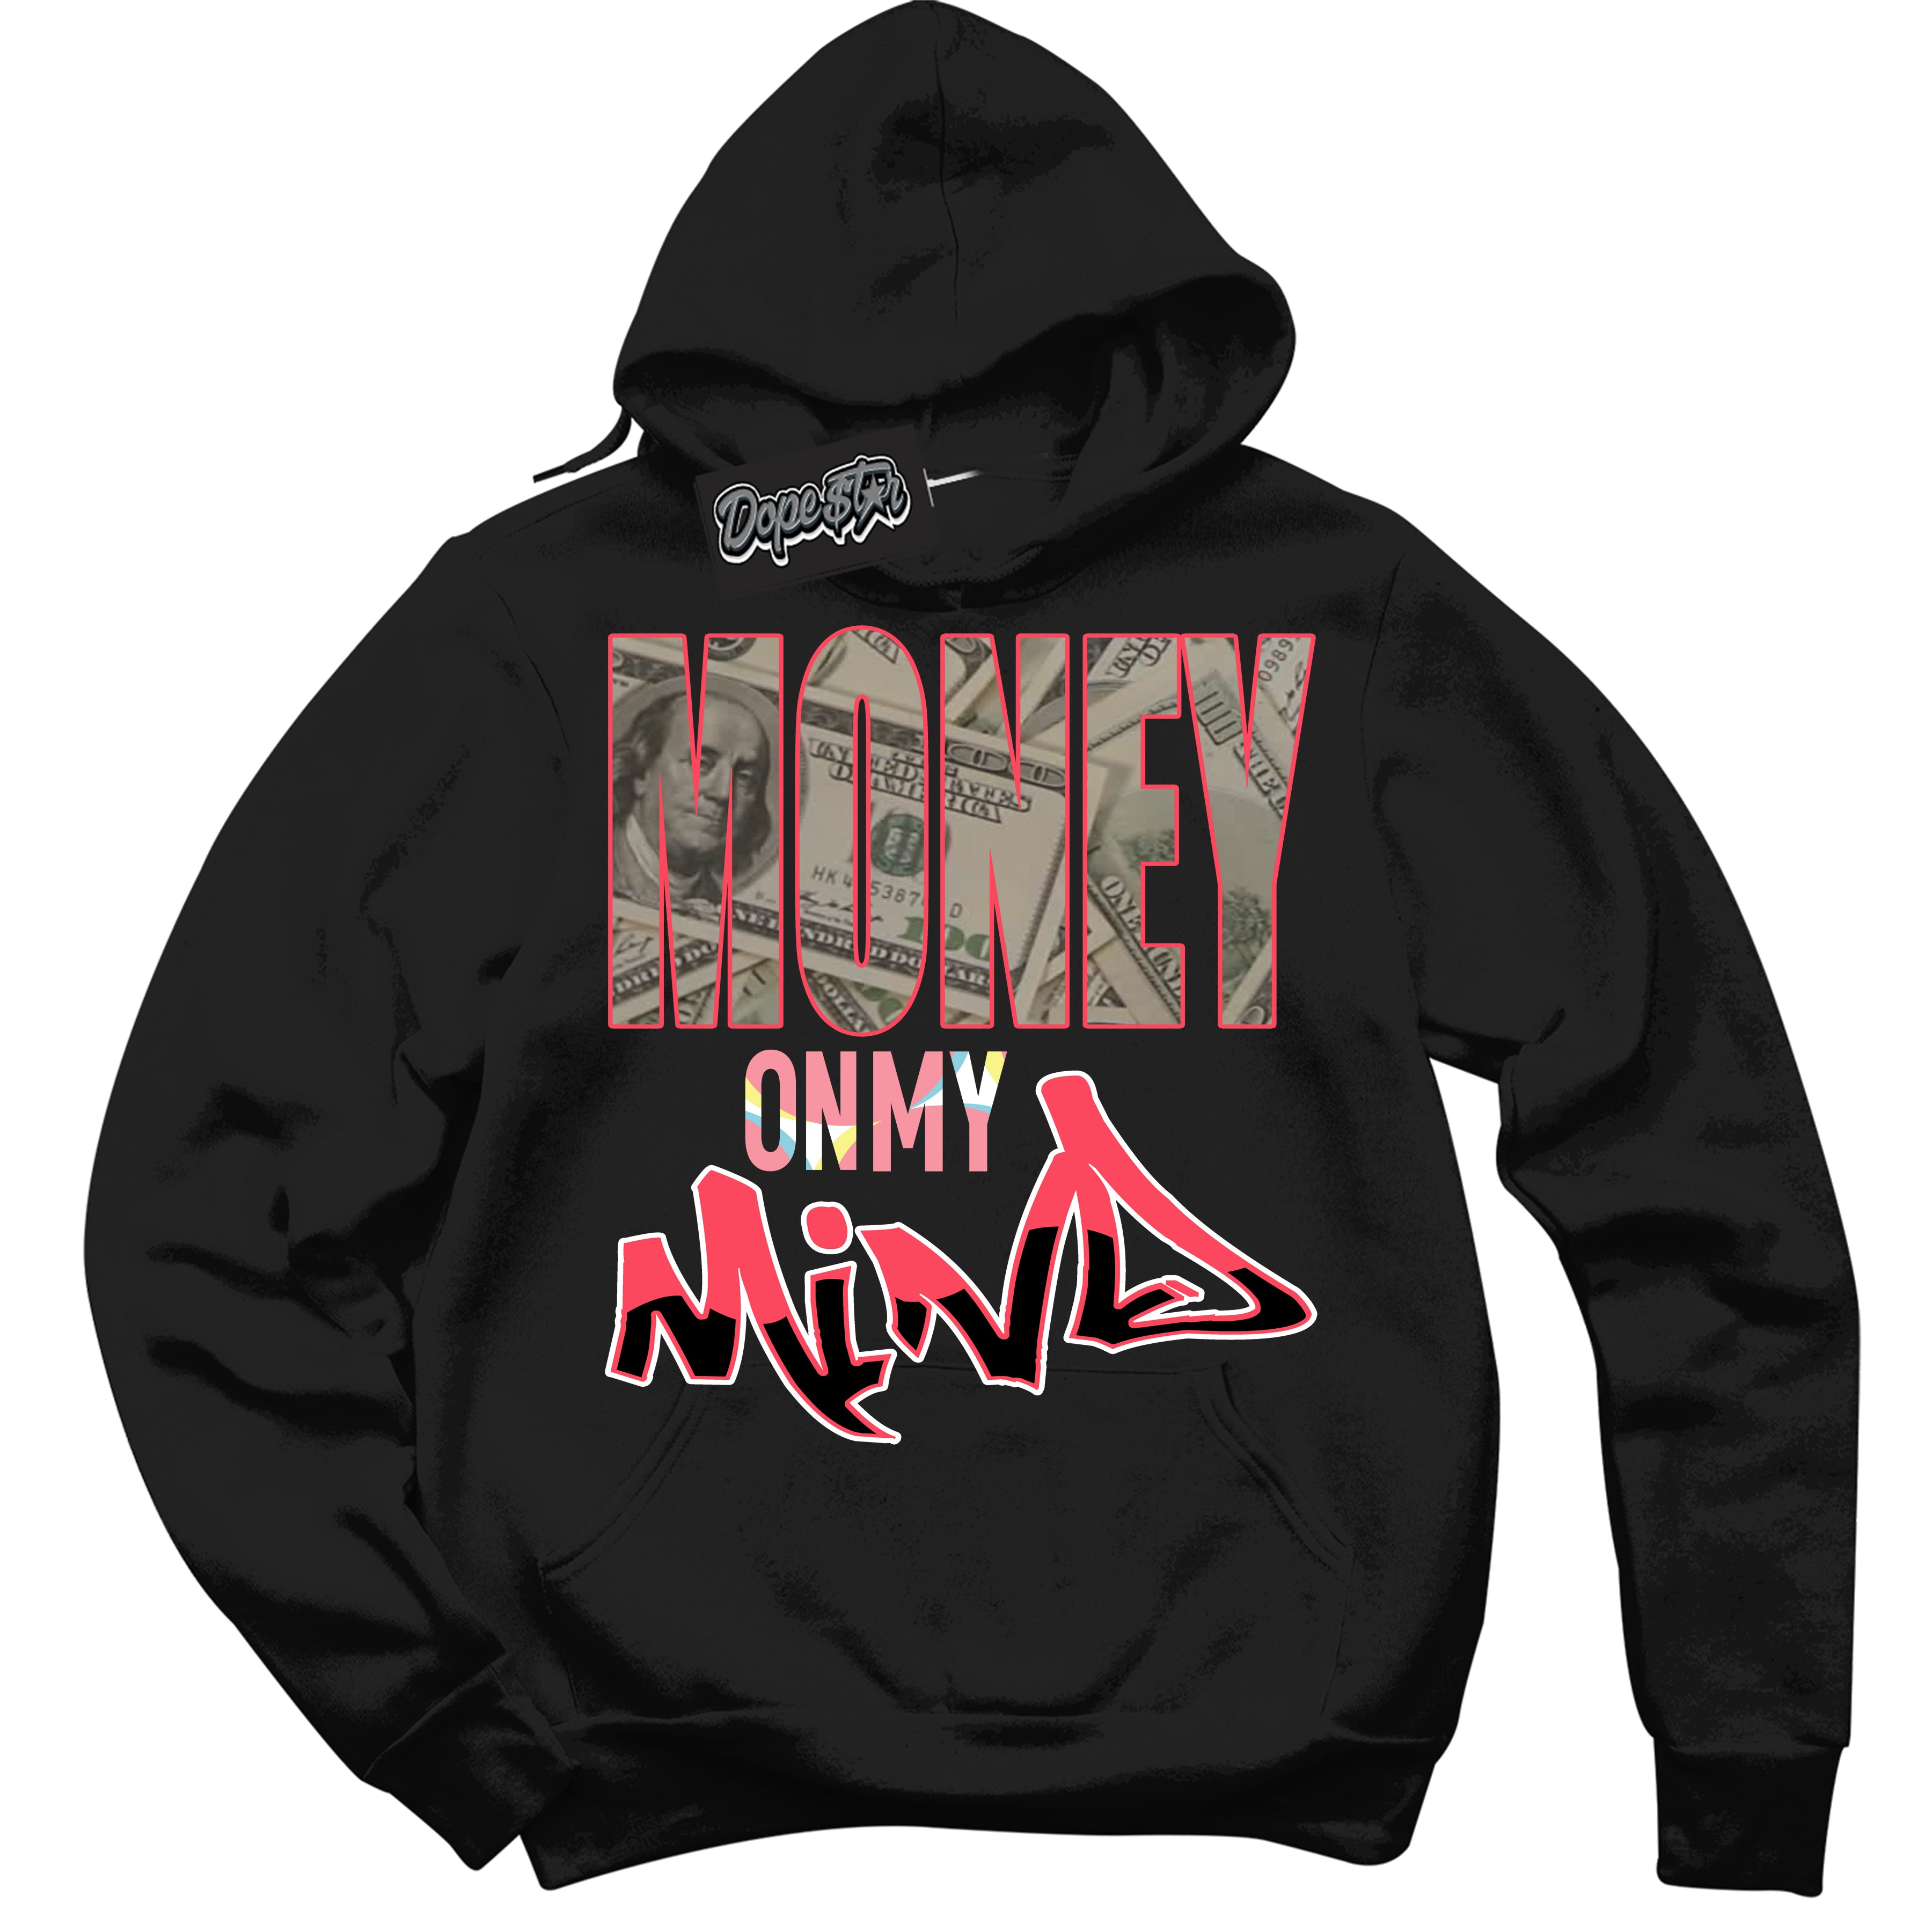 Cool Black Graphic DopeStar Hoodie with “ Money On My Mind “ print, that perfectly matches Spider-Verse 1s sneakers